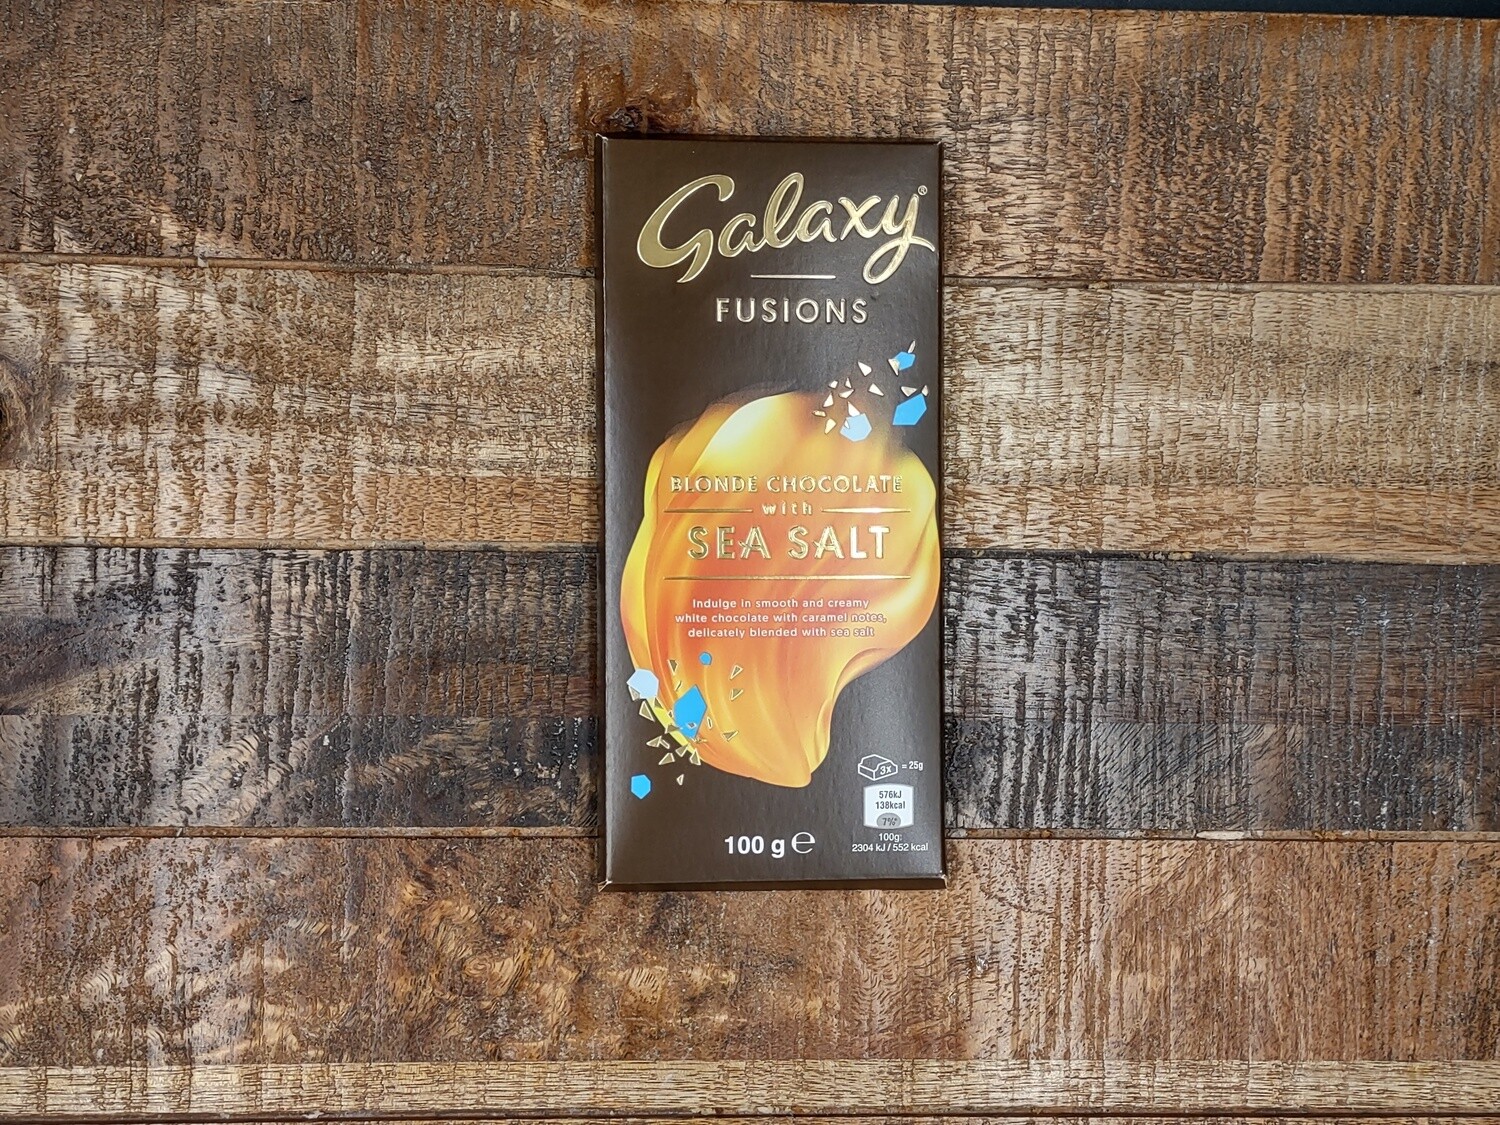 Galaxy Fusions Blonde Chocolate With Sea Salt 100g PAST DATE PROMO